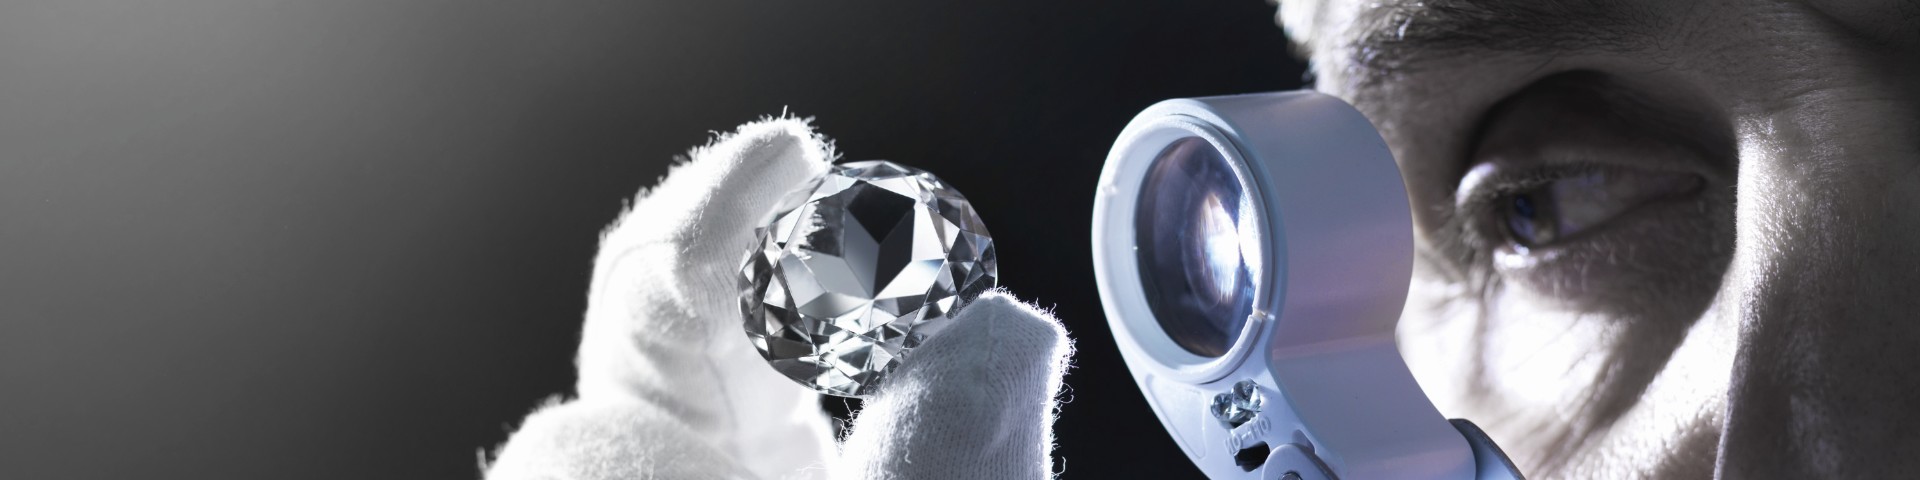 Man examines diamonds with a magnifying glass.